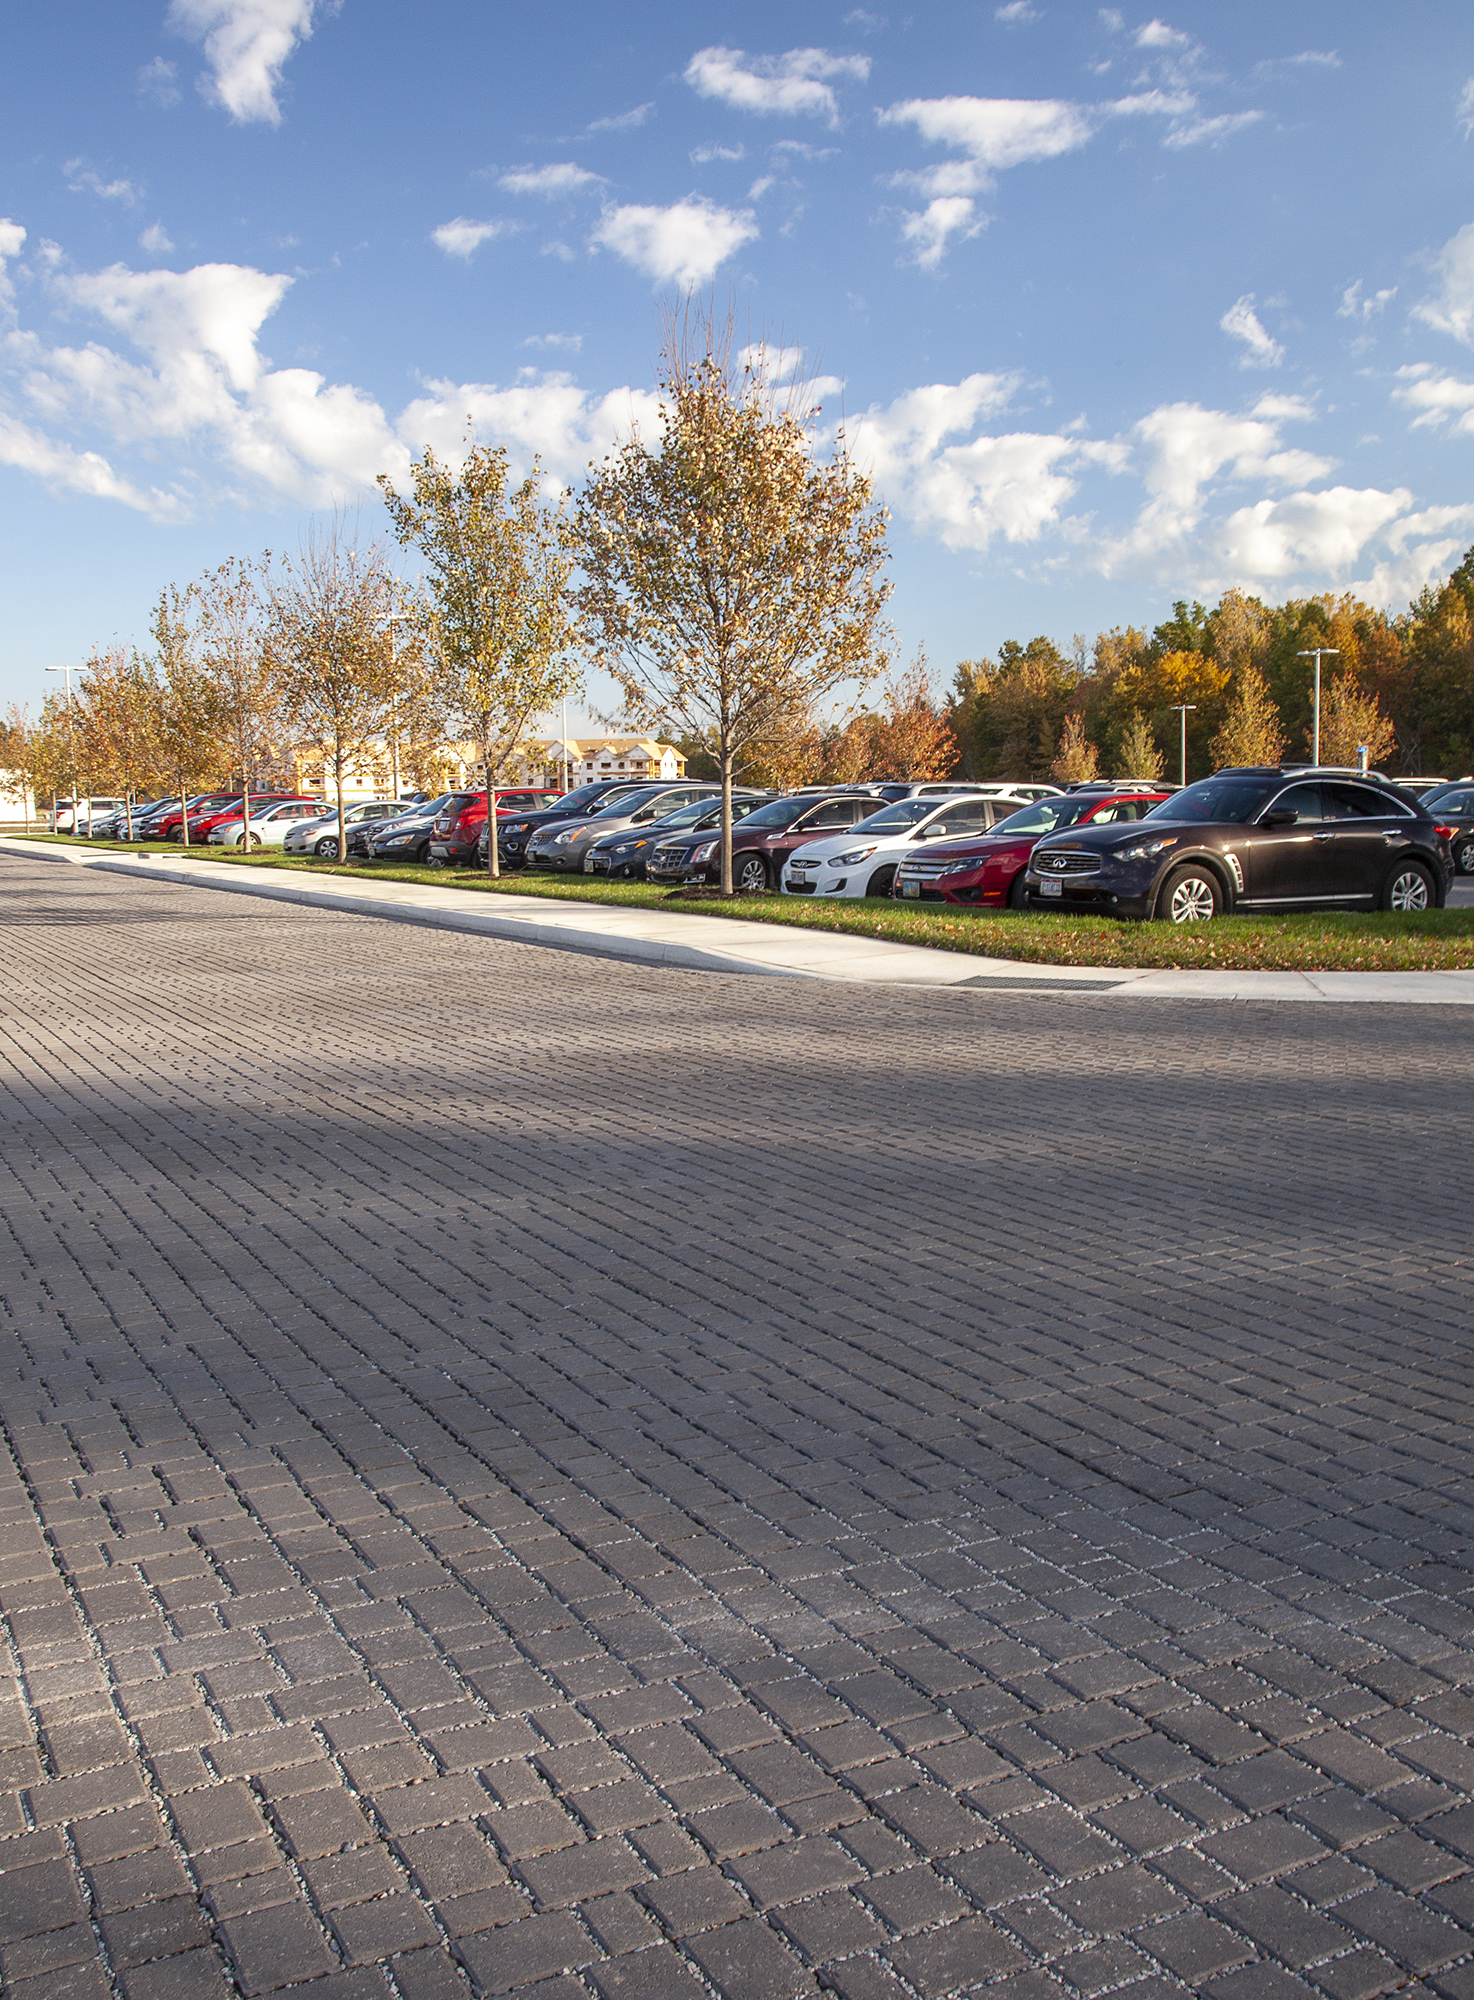 Motor vehicles occupy a busy parking lot at the Cleveland Clinic, featuring a warm dark grey hue of Eco-Optiloc™ pavers throughout the space.